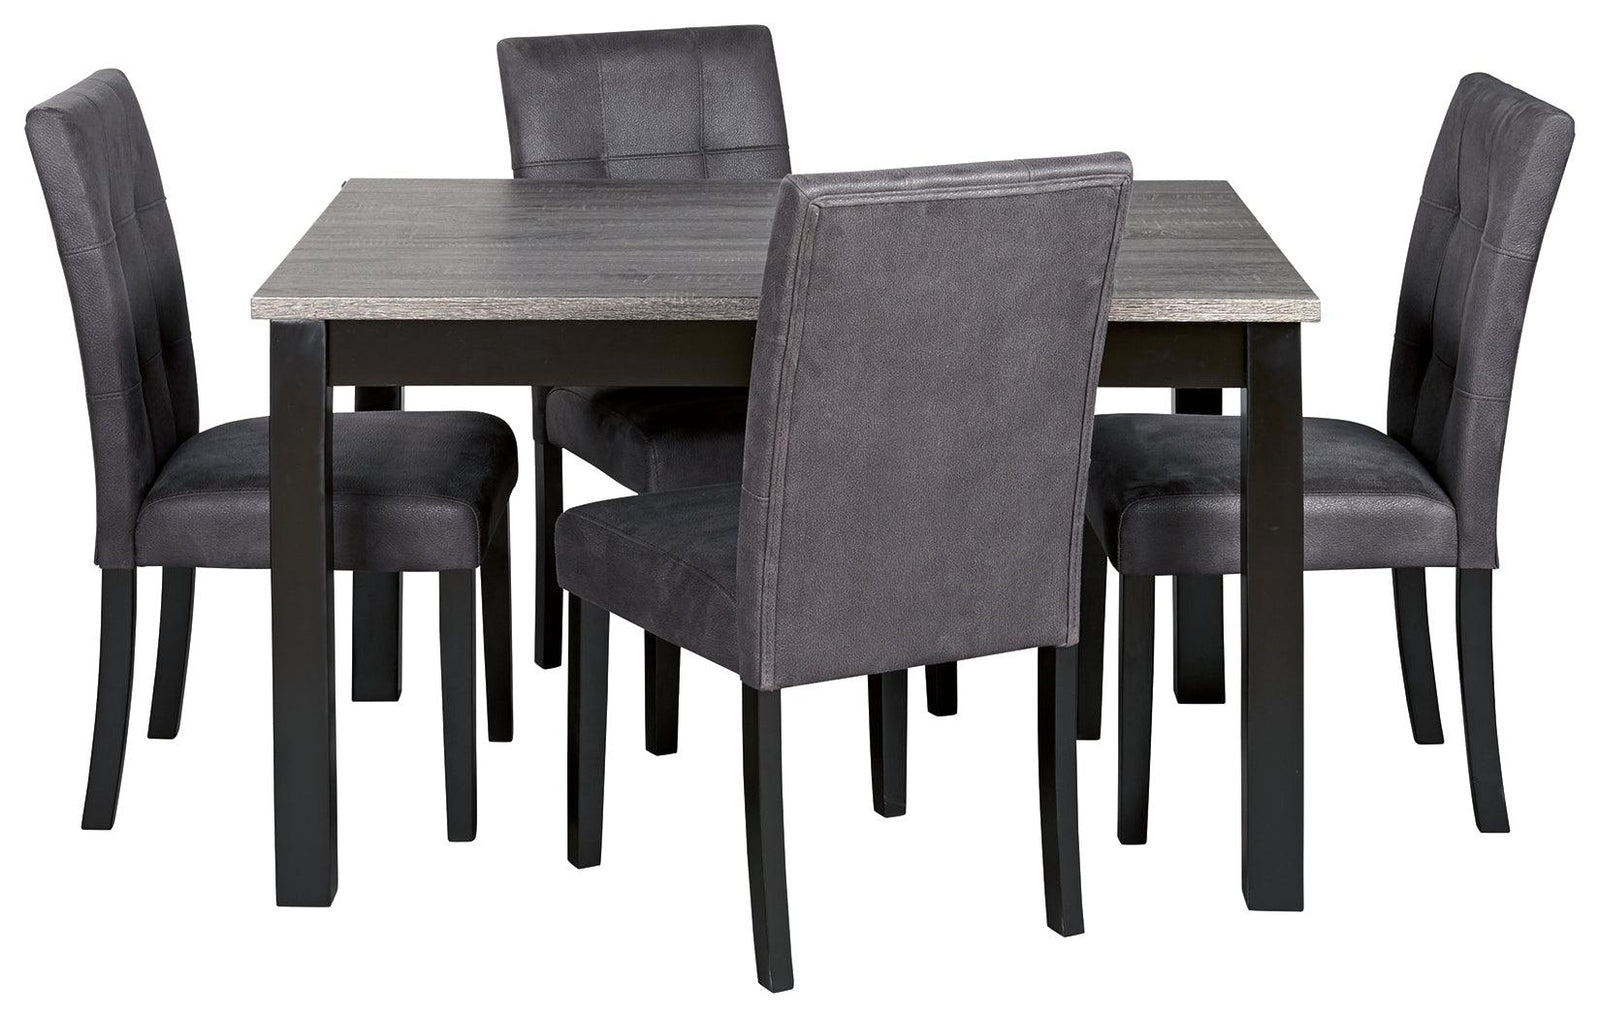 Garvine Two-tone Dining Table And Chairs (Set Of 5) - Ella Furniture